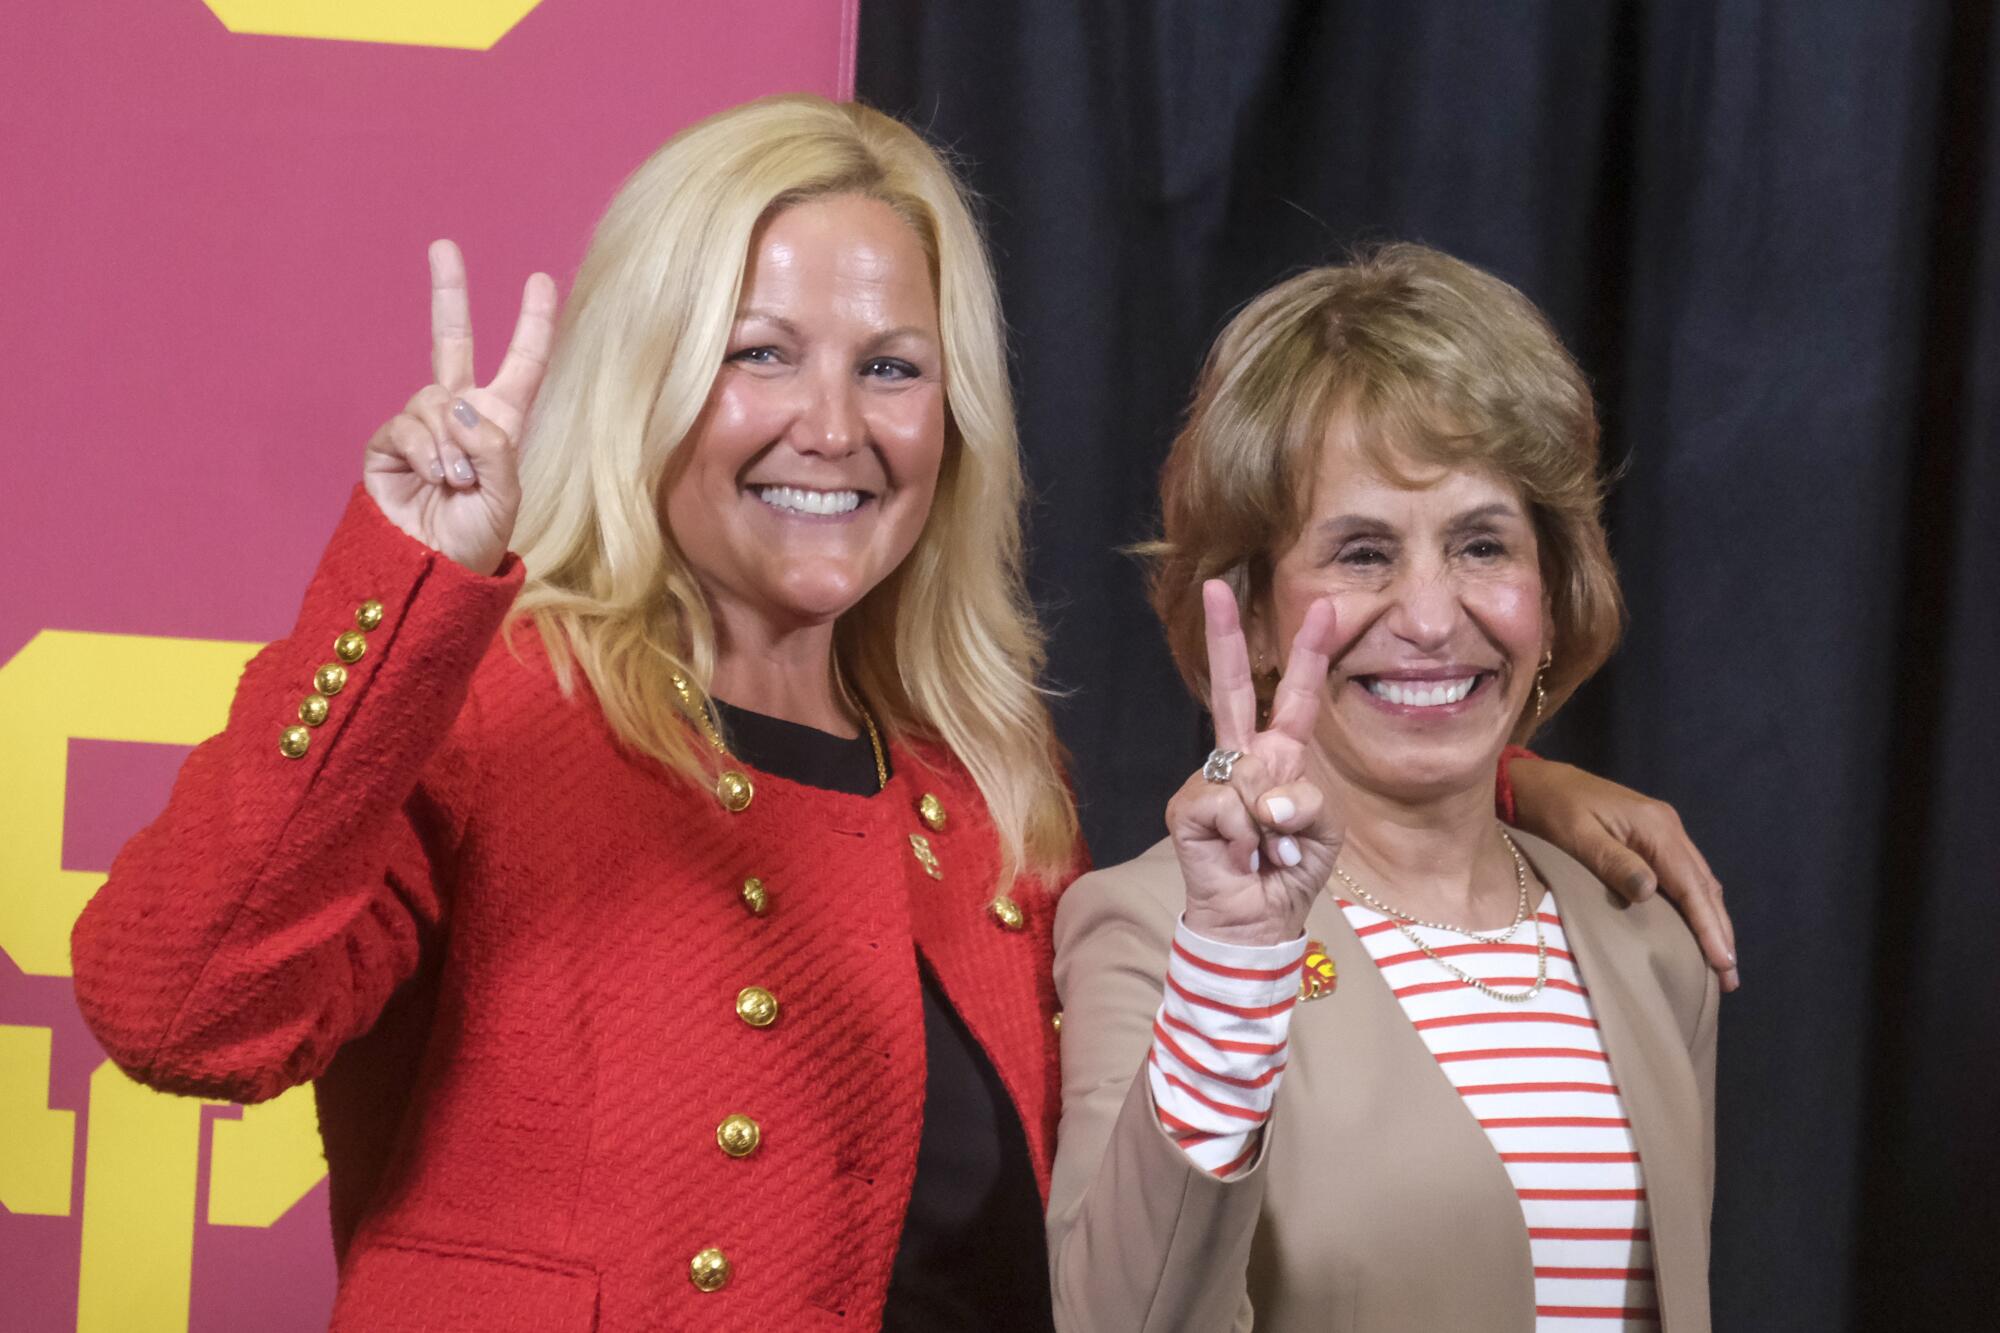 Jennifer Cohen and Carol Folt flash two fingers in the air, forming USC's victory sign